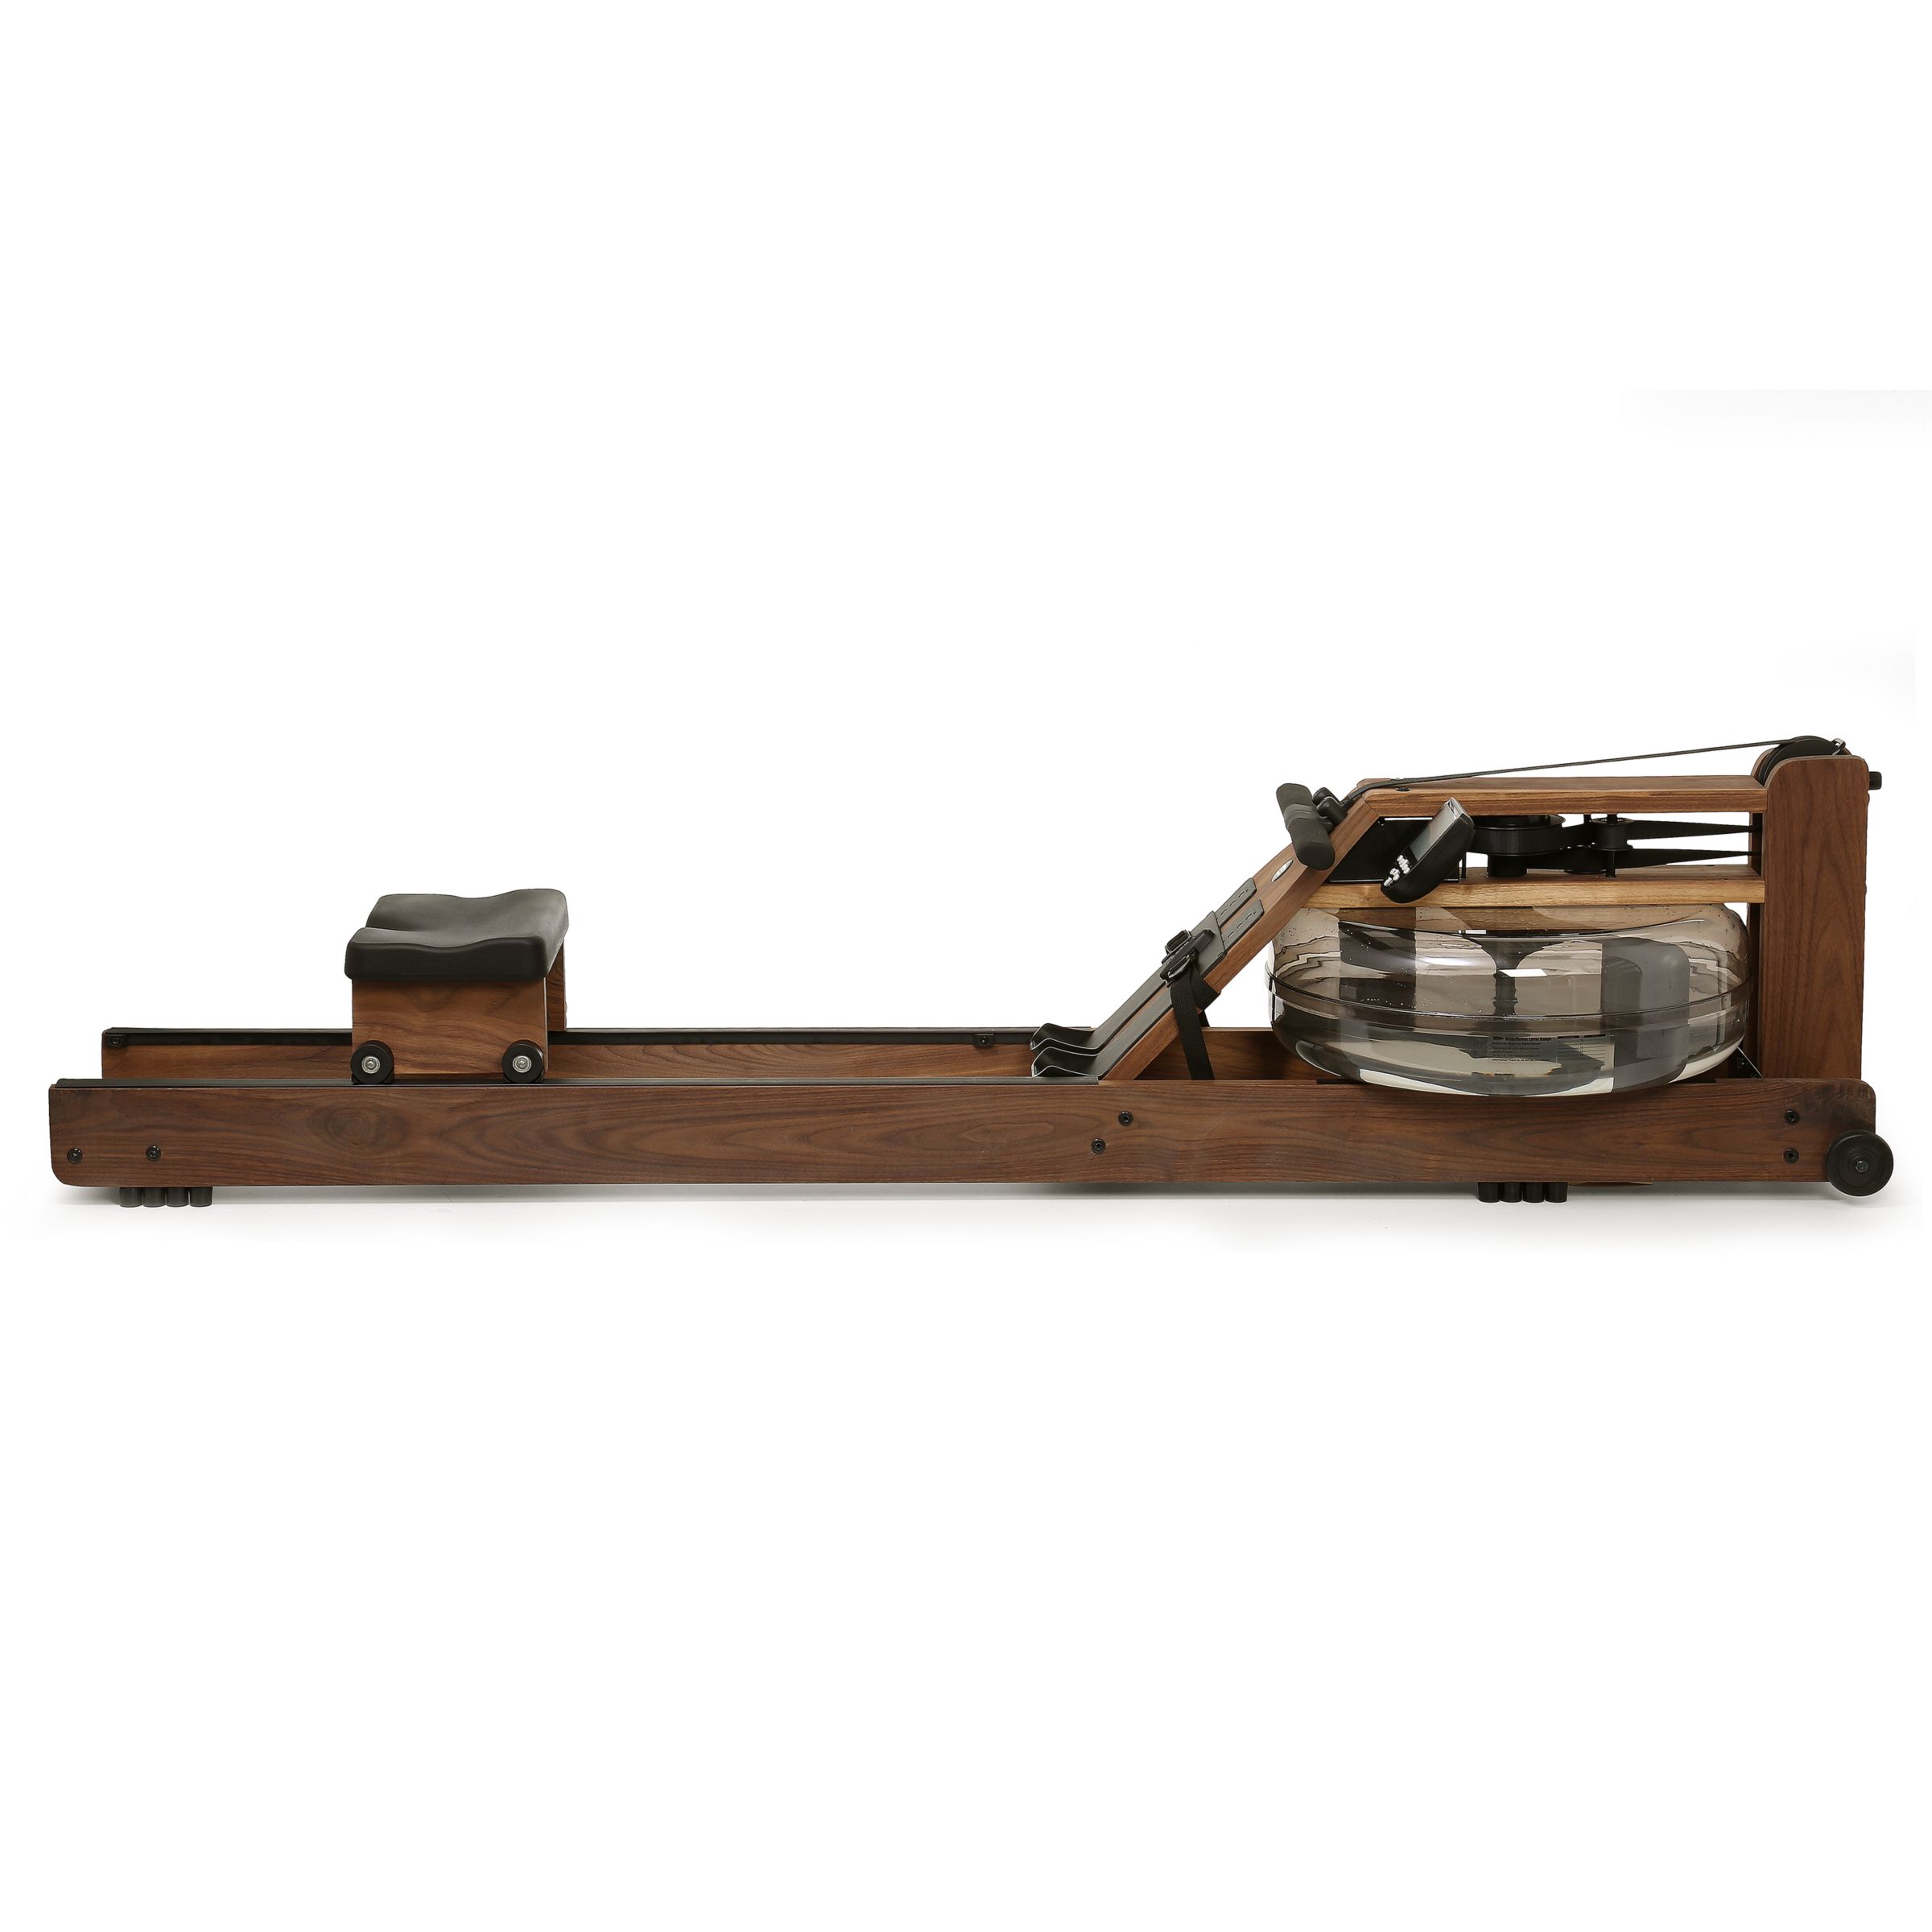 WaterRower Classic Rowing Machine with S4 Performance Monitor, American Black Walnut at JohnLewis